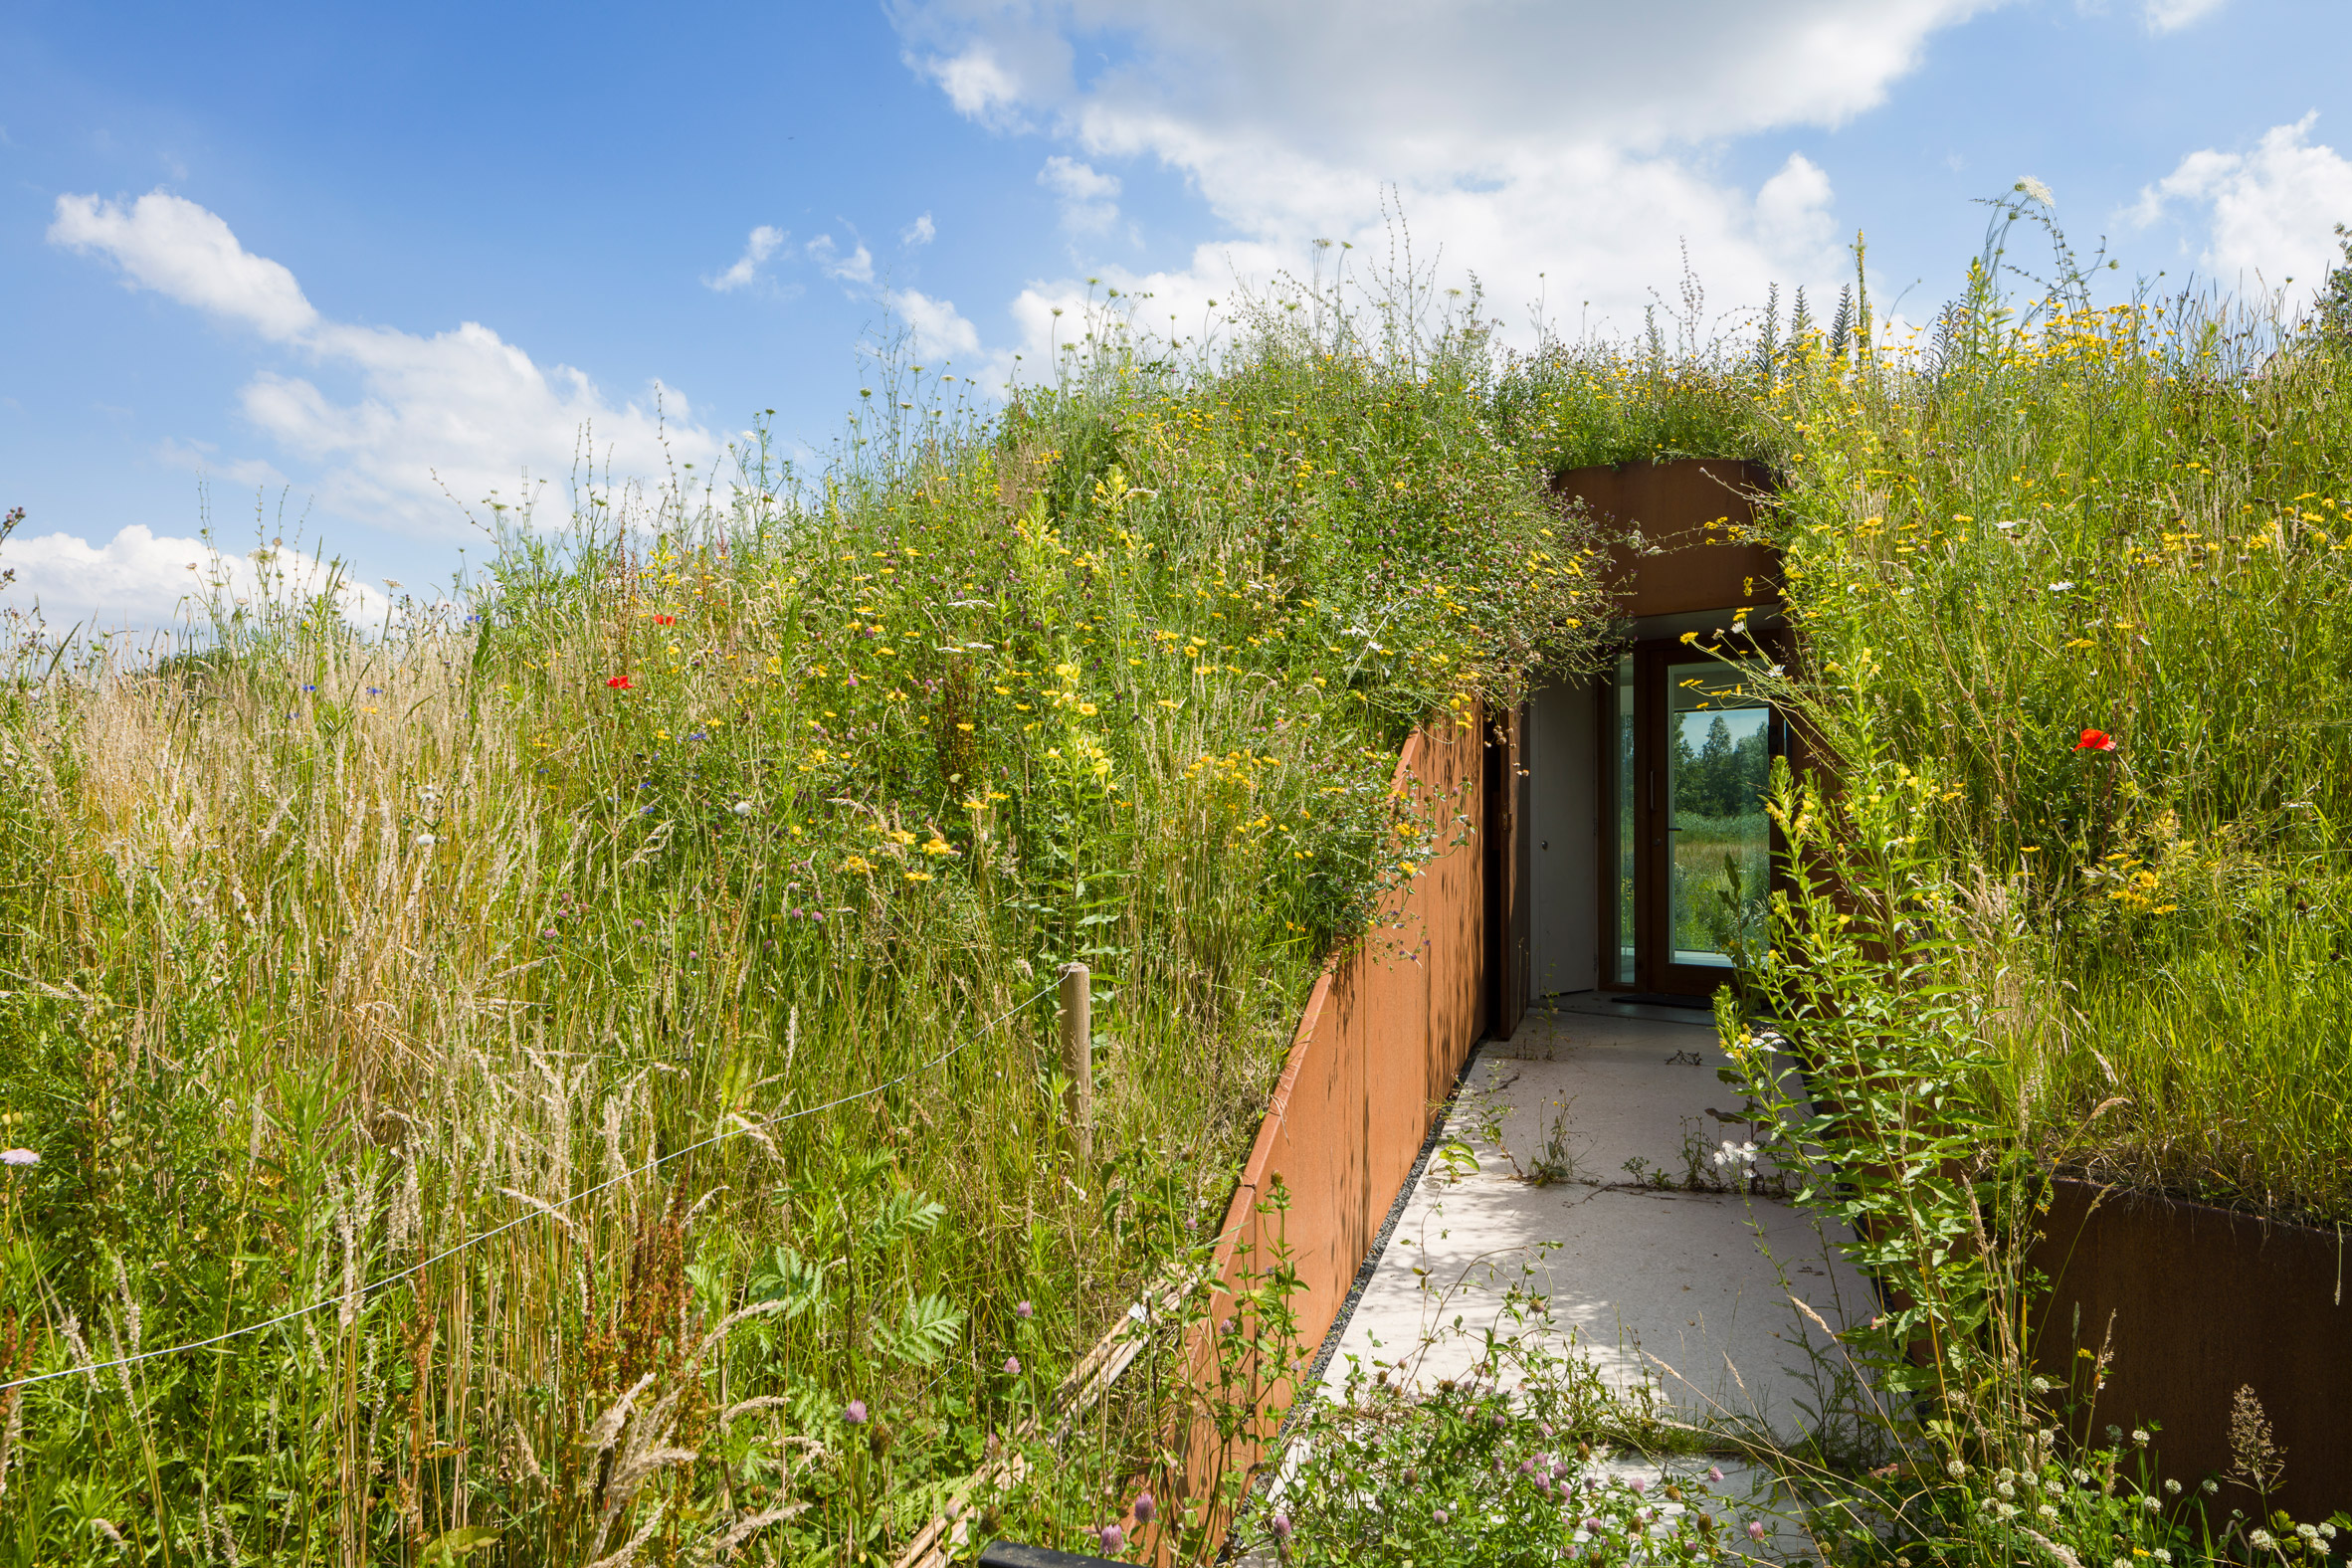 Entrance into a home through a grassy mound by WillemsenU